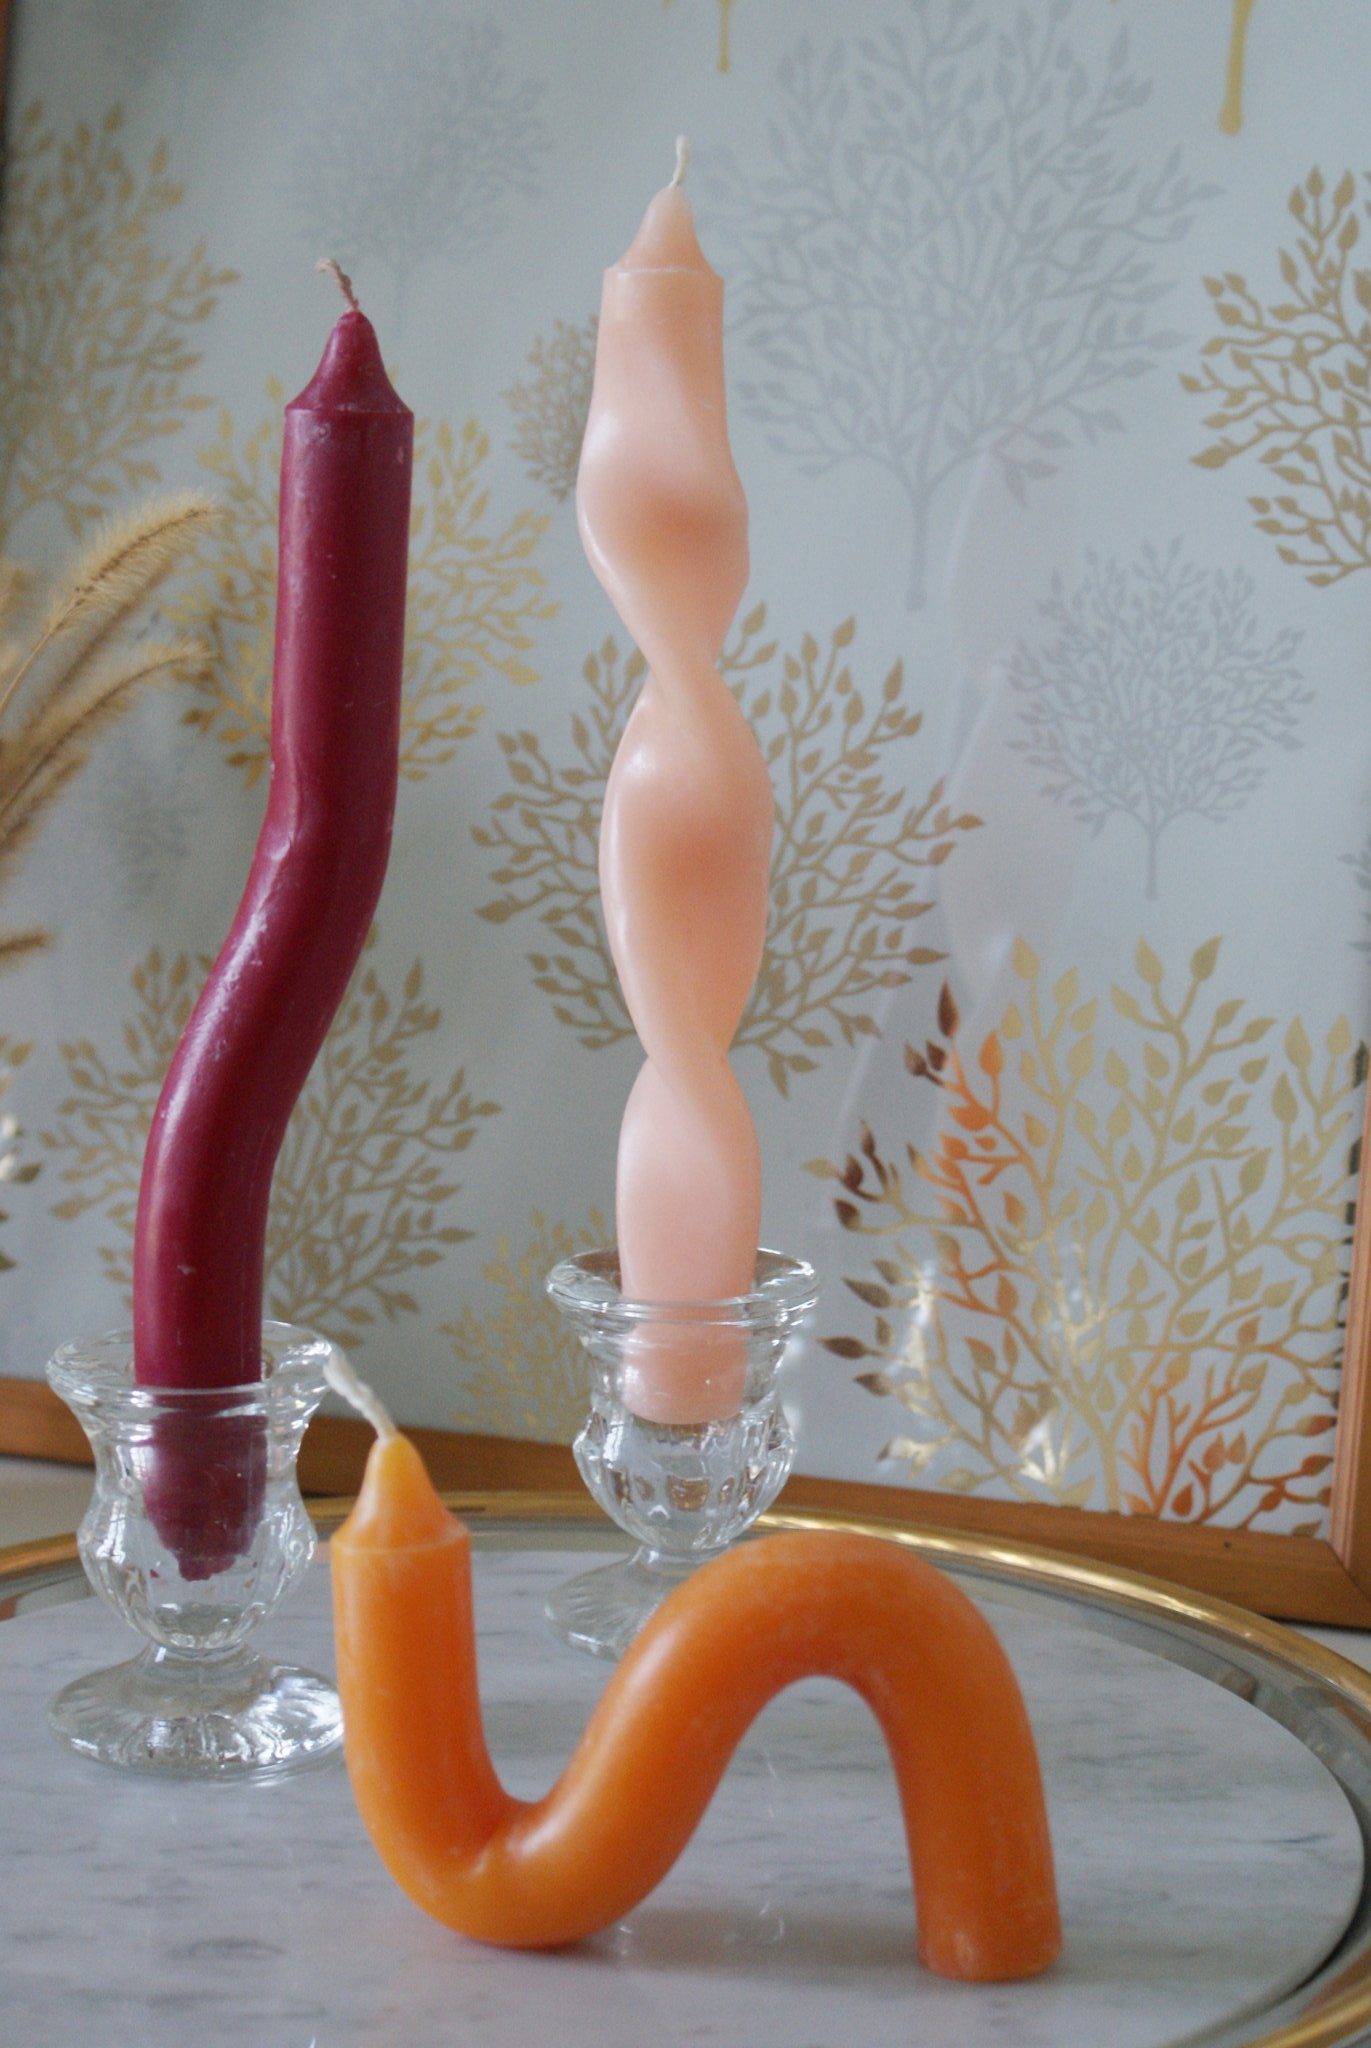 diy aesthetic twisted candles how make home decoration decorate fell idea craft easy tutorial sculpture francinesplaceblog 7